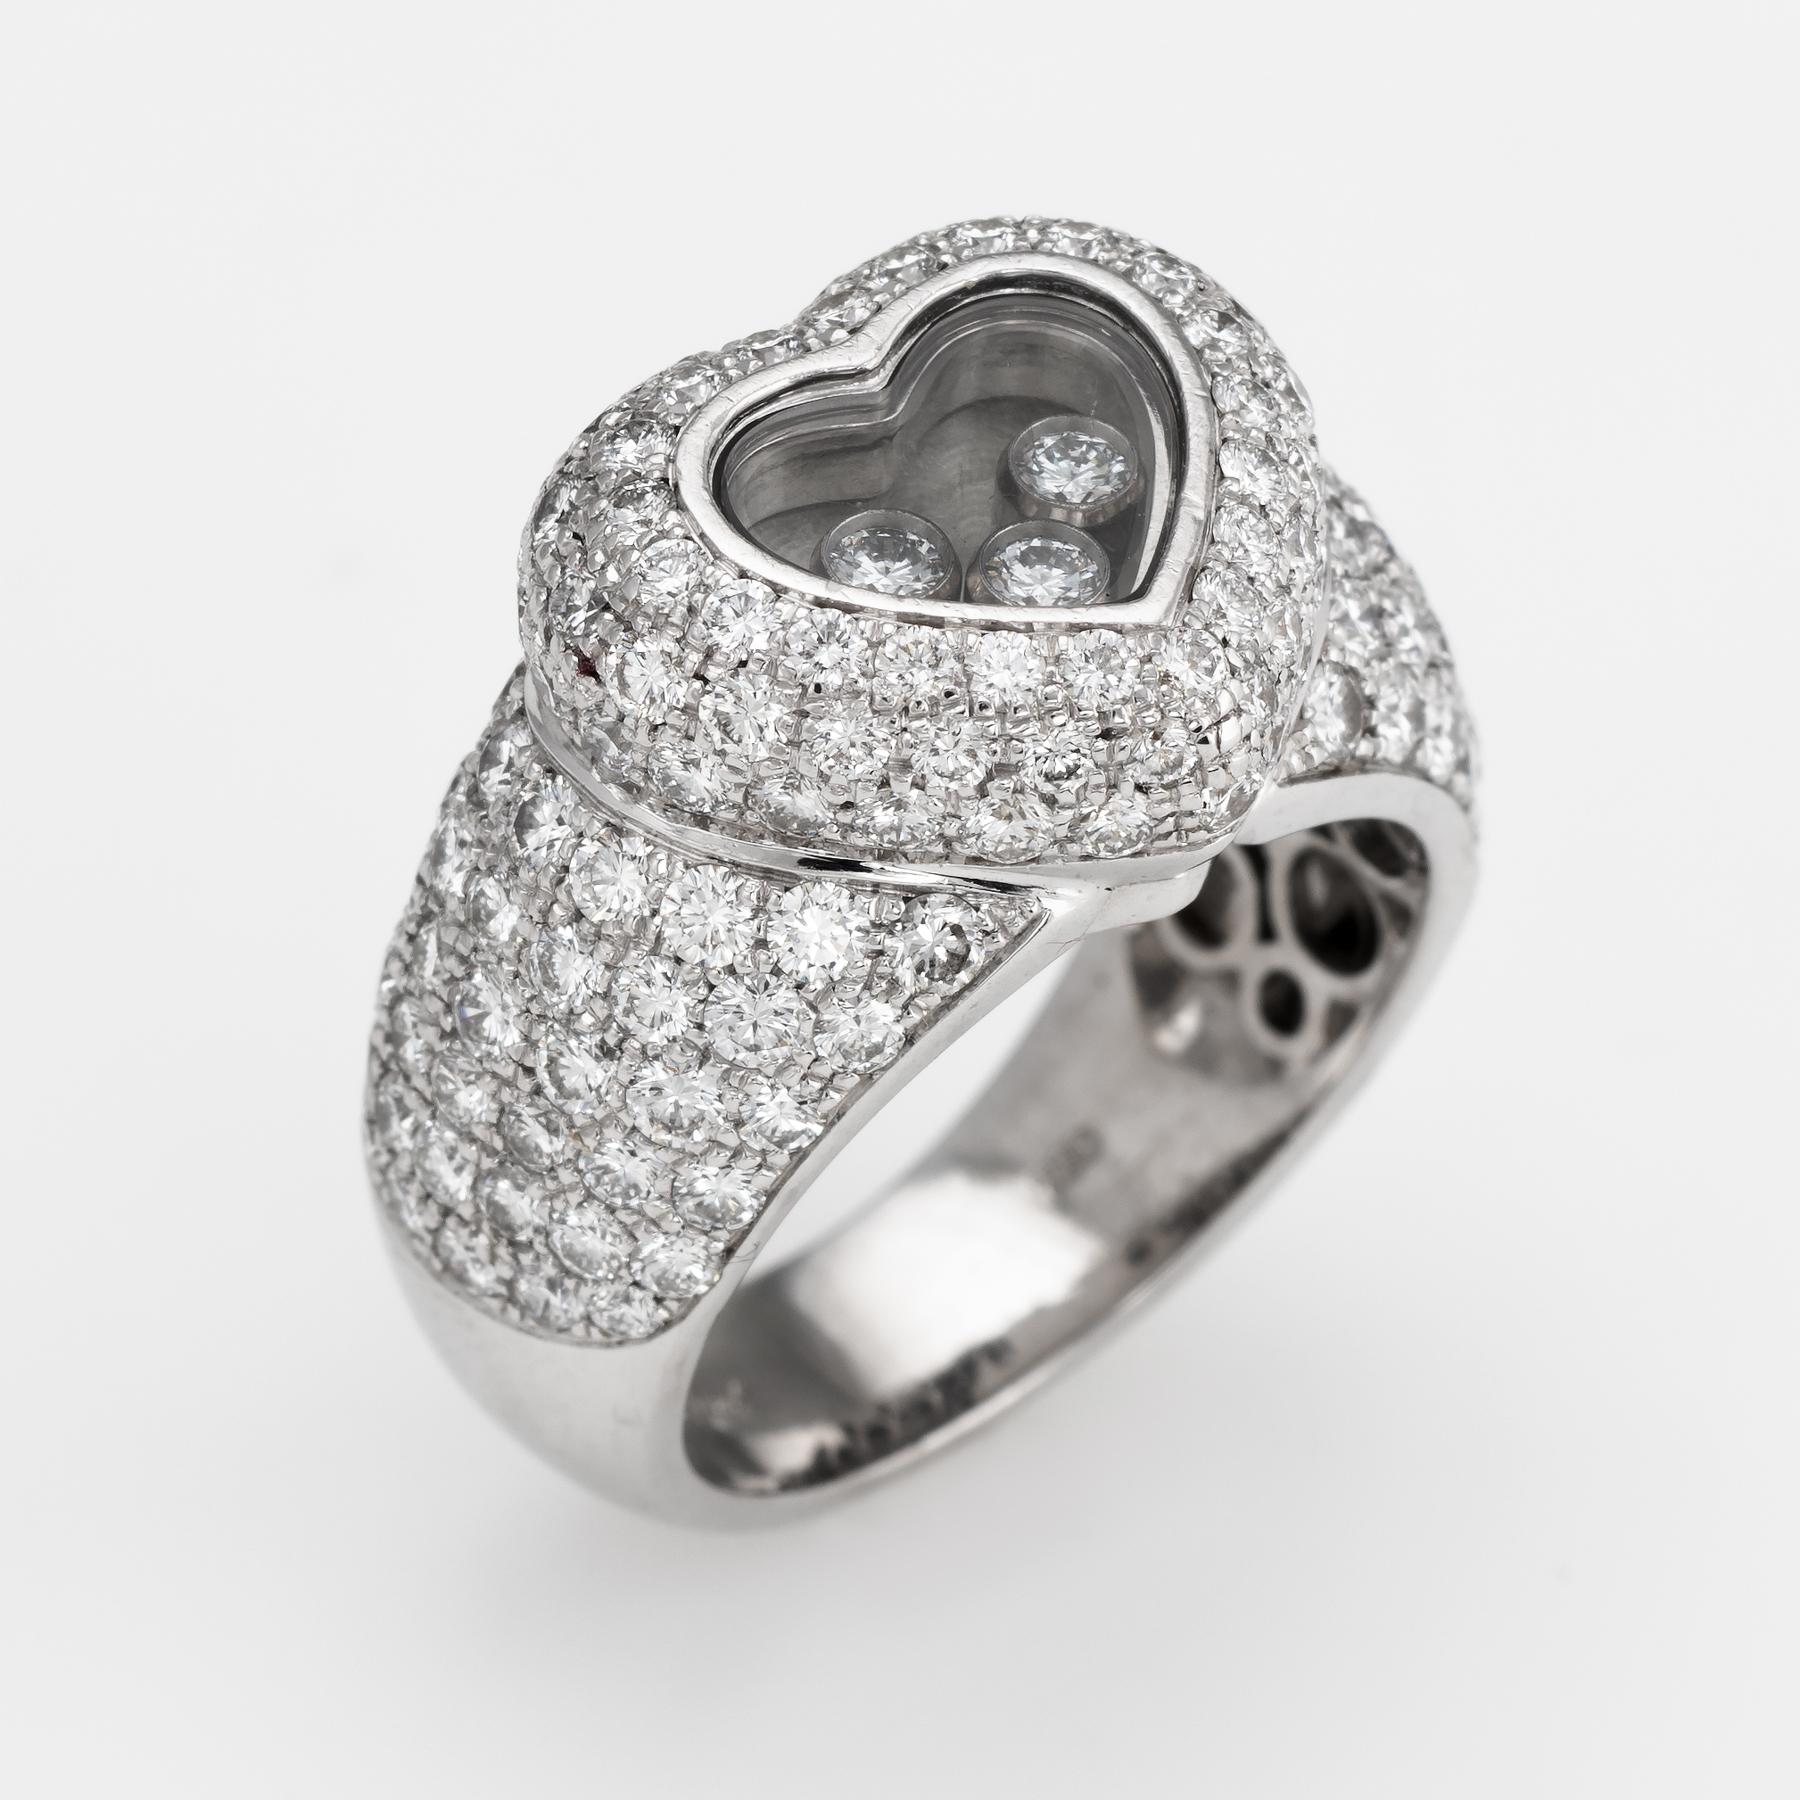 Finely detailed pre owned Chopard diamond heart ring, crafted in 18 karat white gold. 

Round brilliant cut diamonds are pave set into the heart and shoulders totaling an estimated 3 carats. Three estimated 0.05 carat diamonds 'float' inside the